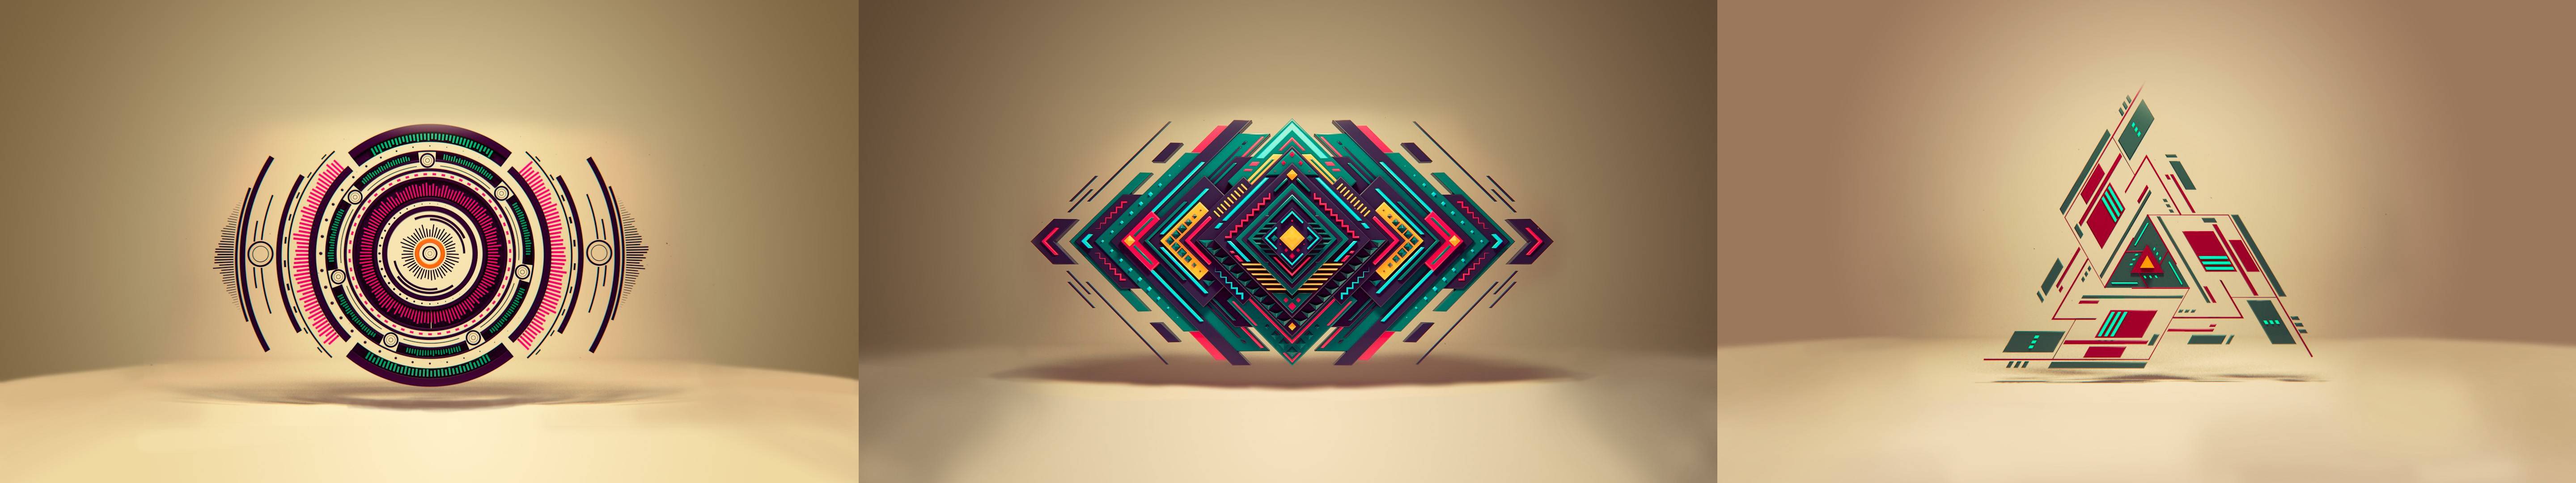 5760X1080 Abstract Wallpapers